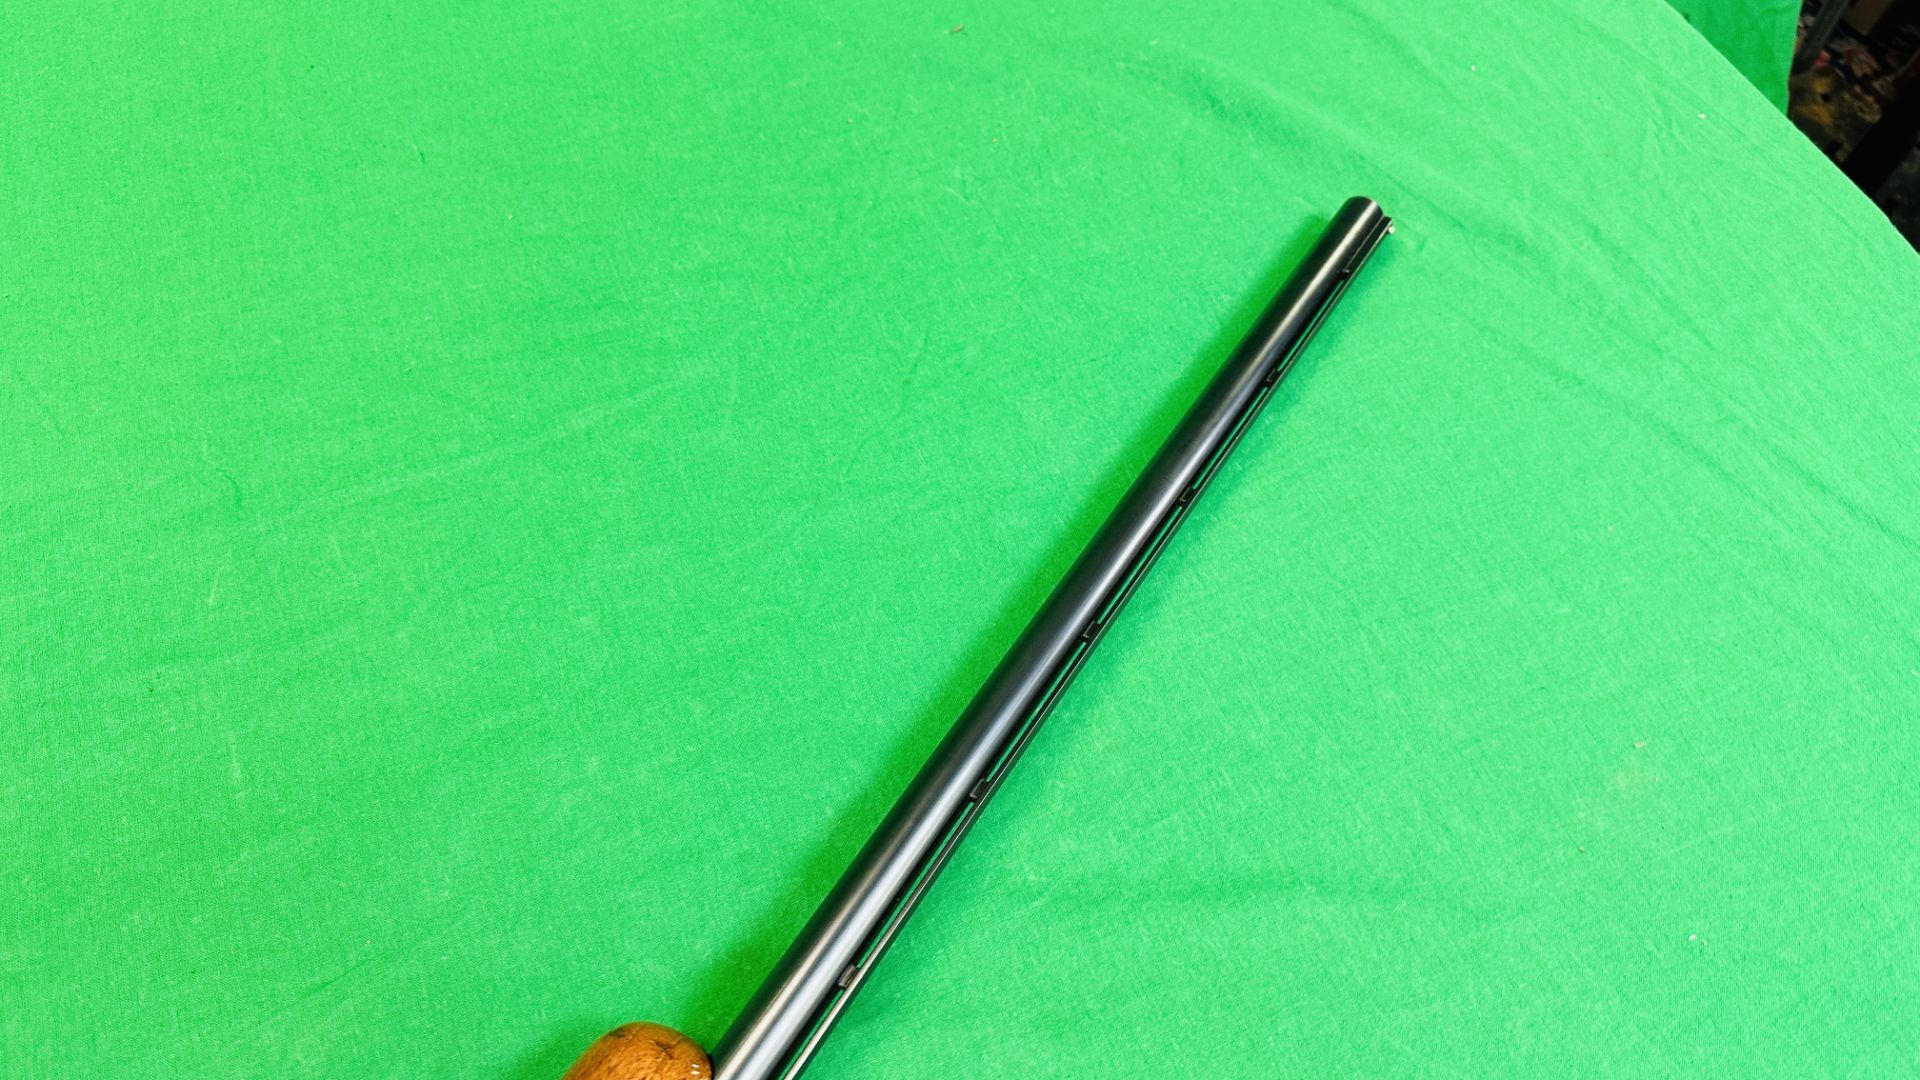 FABRIQUE 12 BORE SELF LOADING TWO SHOT SHOTGUN MODEL "DOUBLE TWO" #C23651 29 INCH BARREL VENTILATED - Image 12 of 15